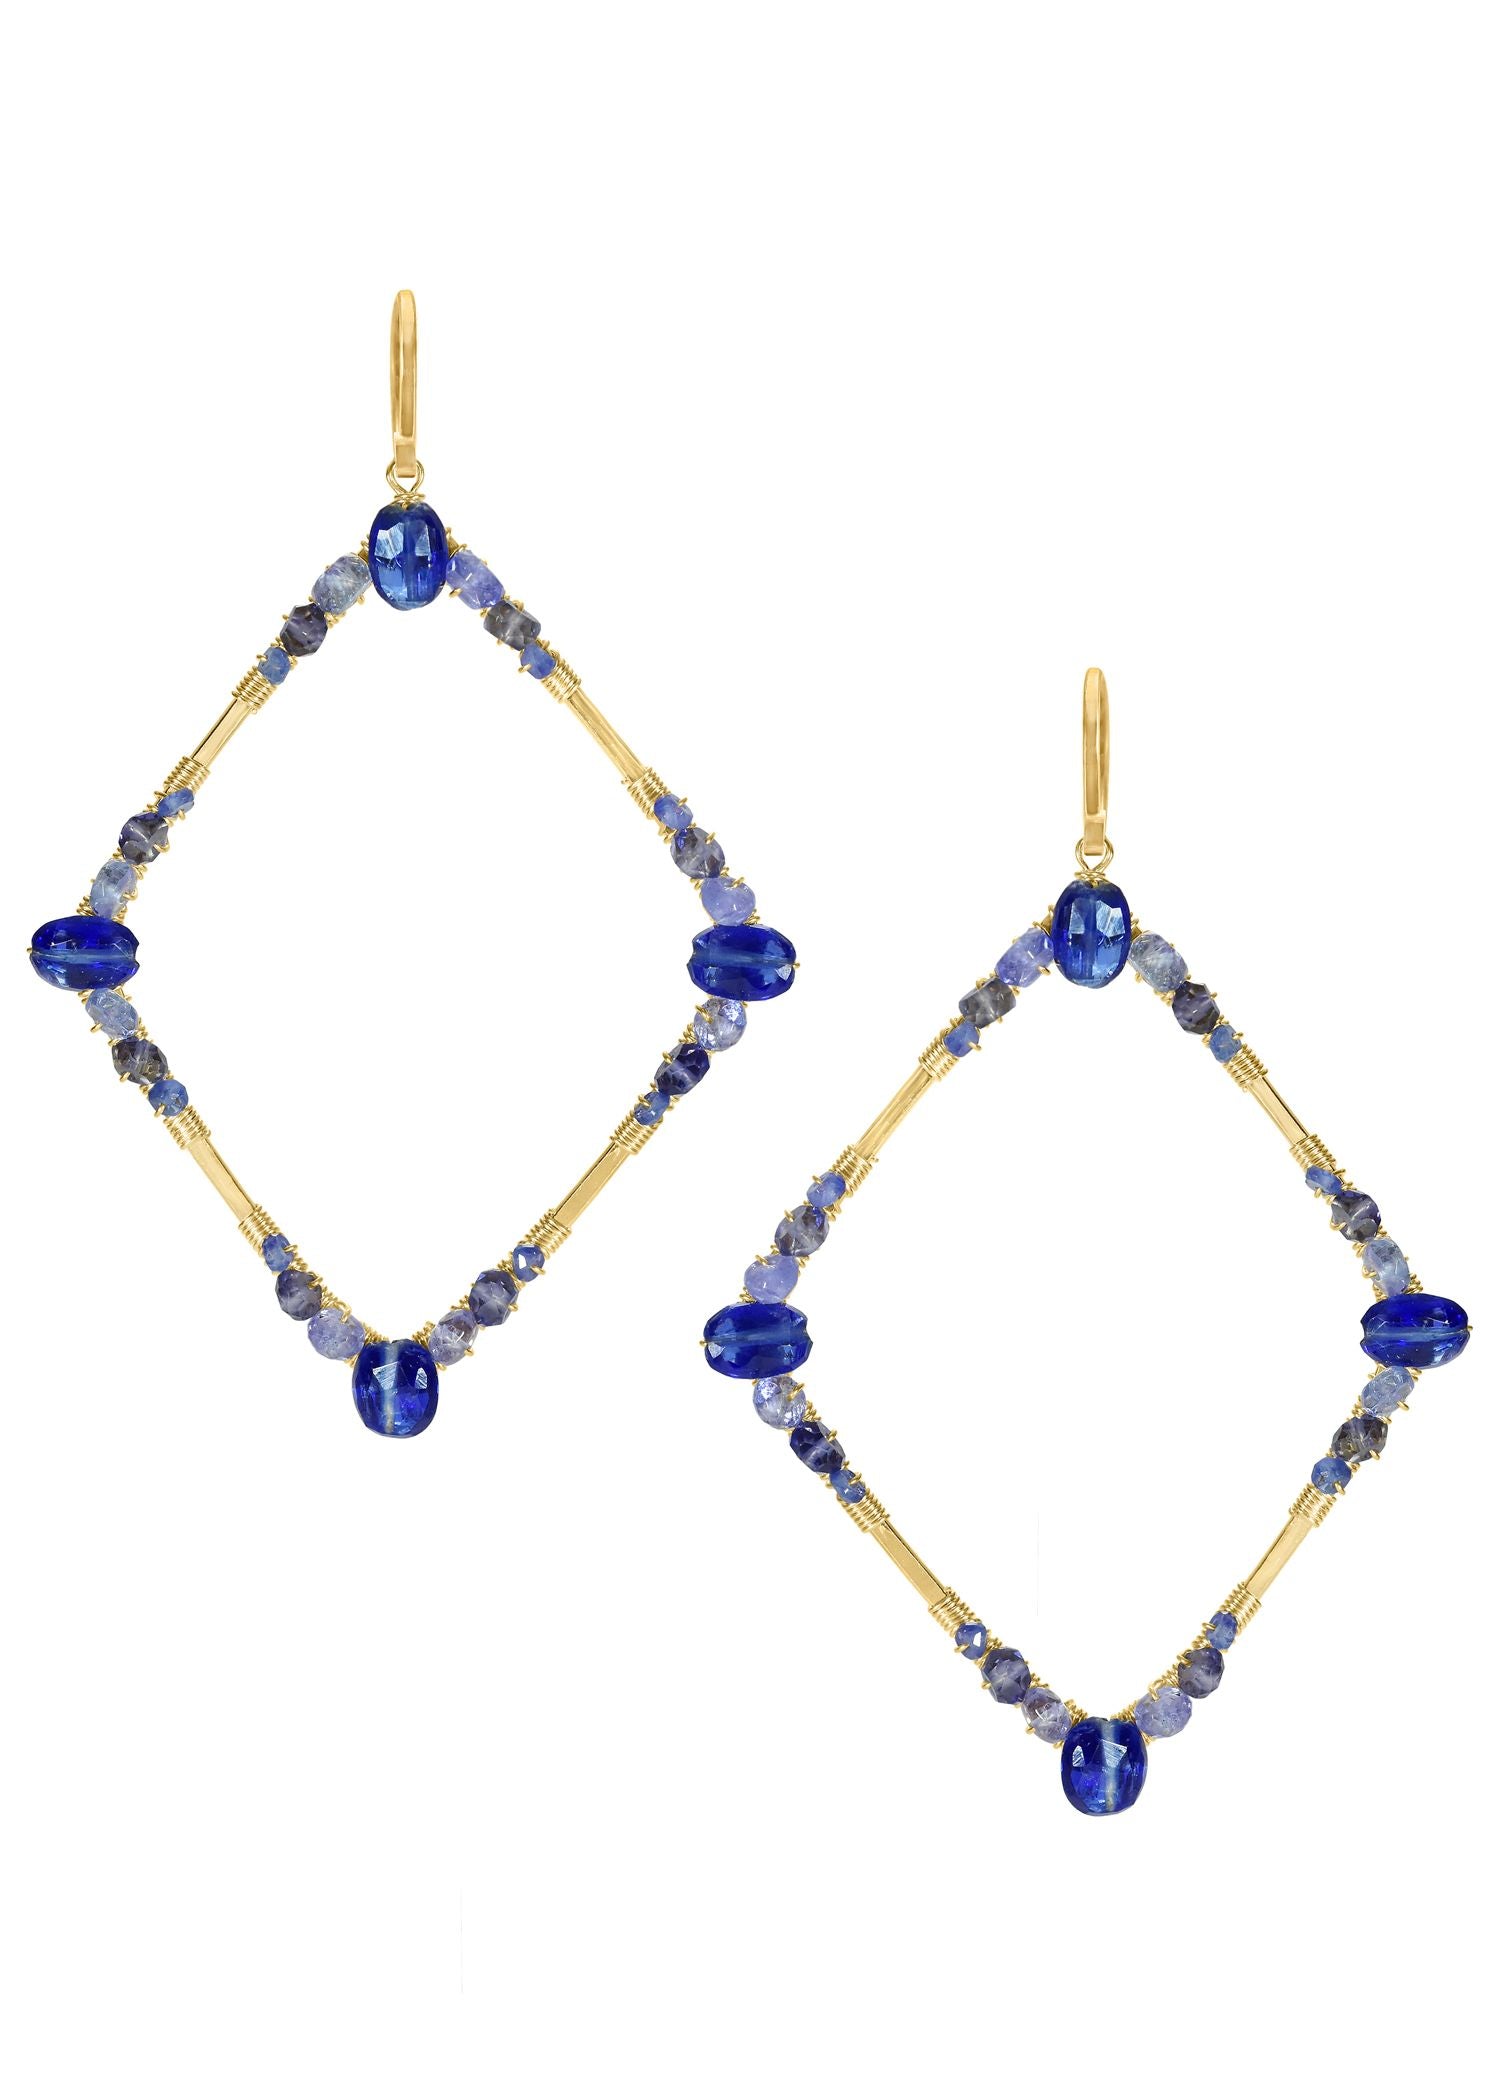 Kyanite Blue sapphire Tanzanite Lolite 14k gold fill Earrings measure 2-5/8" in length (including ear wires) and 1-9/16" in width Handmade in our Los Angeles studio